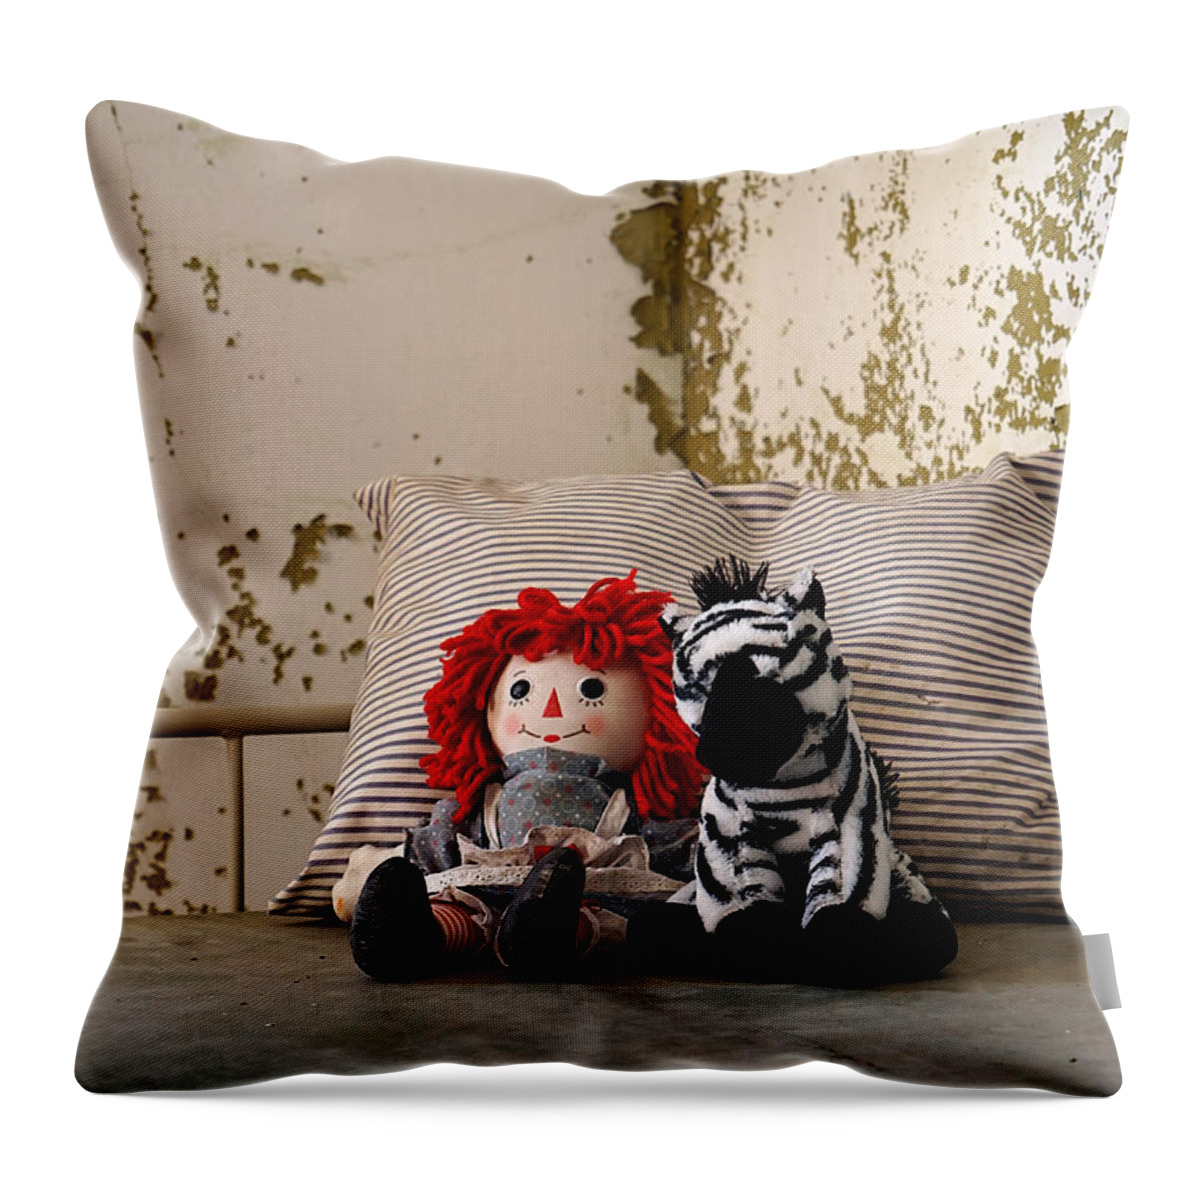 Richard Reeve Throw Pillow featuring the photograph Small Comforts by Richard Reeve